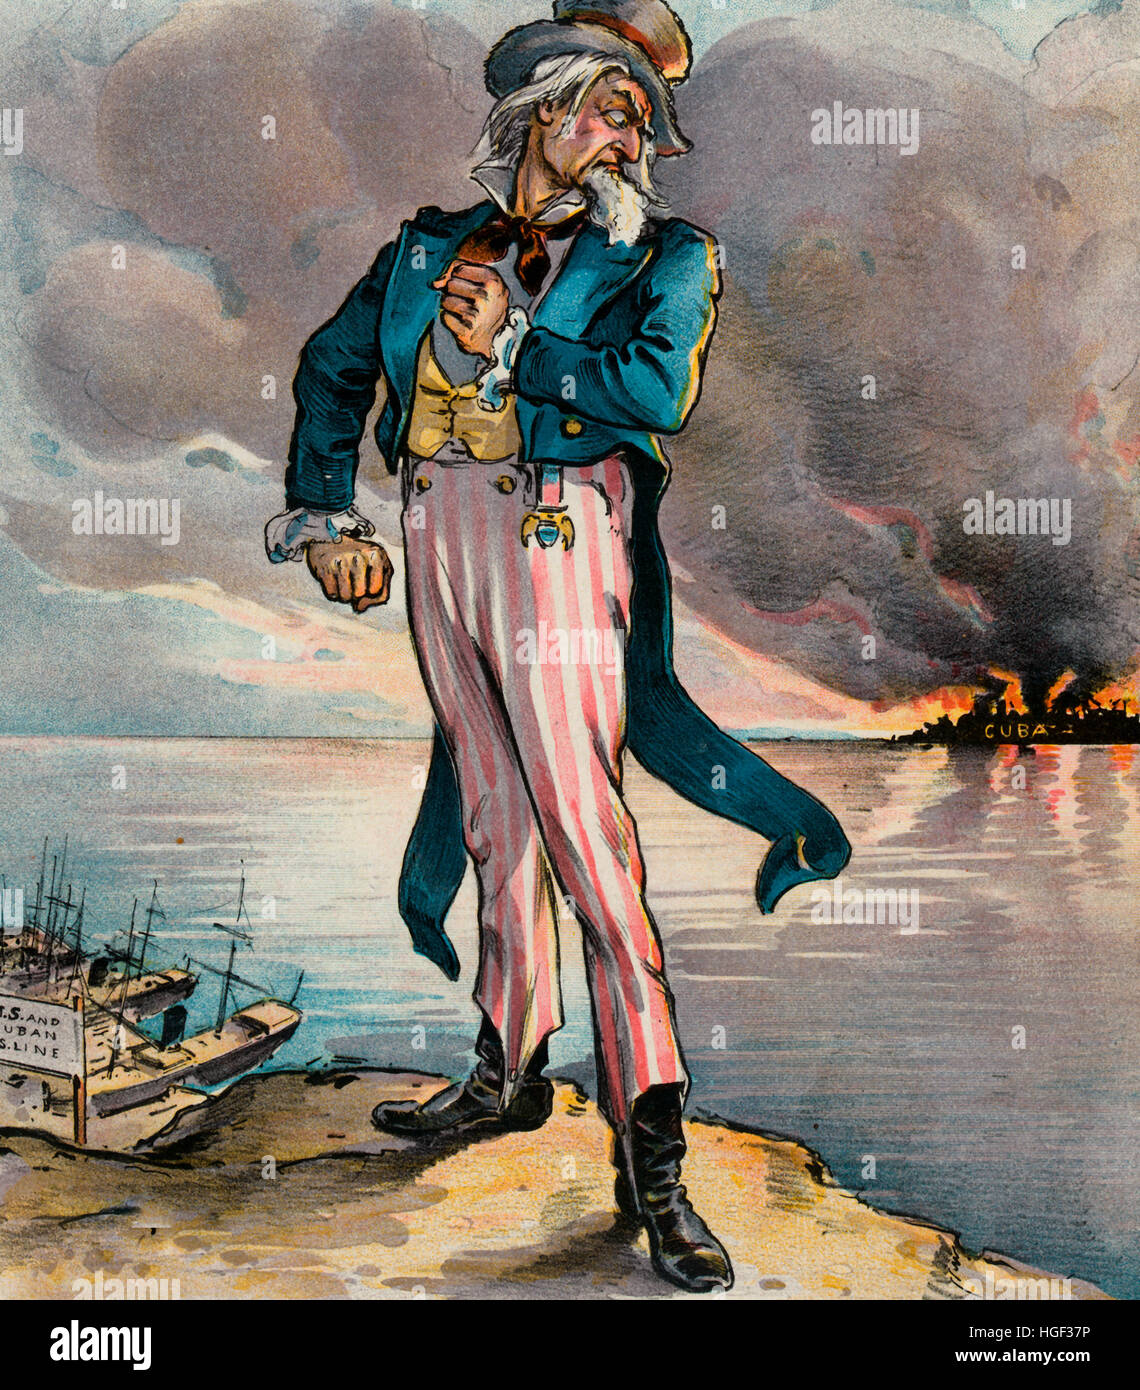 Time nearly up - Political cartoon shows Uncle Sam standing on American soil next to the docks of the 'U.S.A. and Cuban S.S. Line', looking over his shoulder at Cuba in flames. 1897 Stock Photo